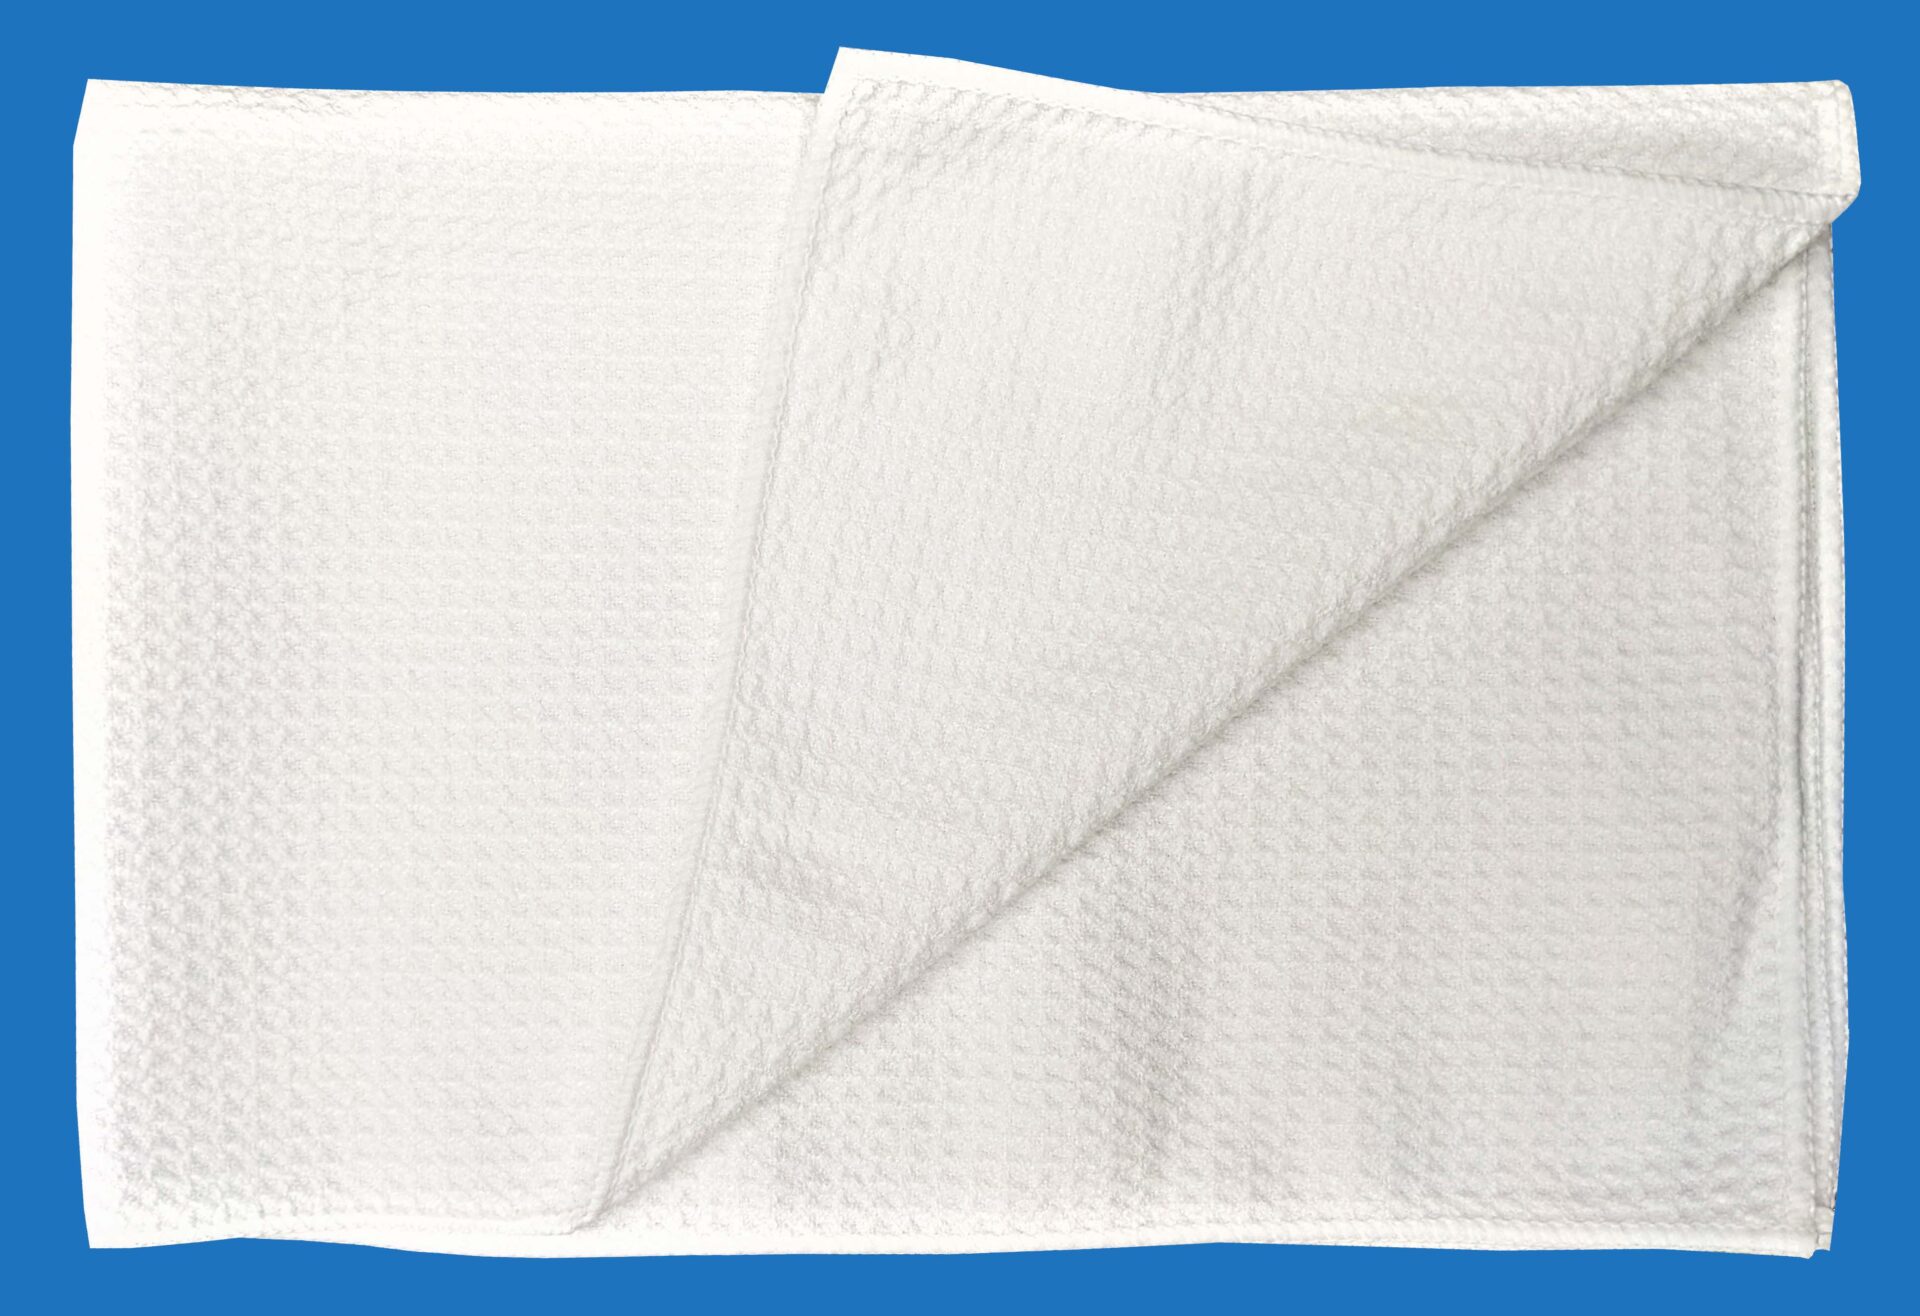 Sublimation Blank Towels with or without Grommets